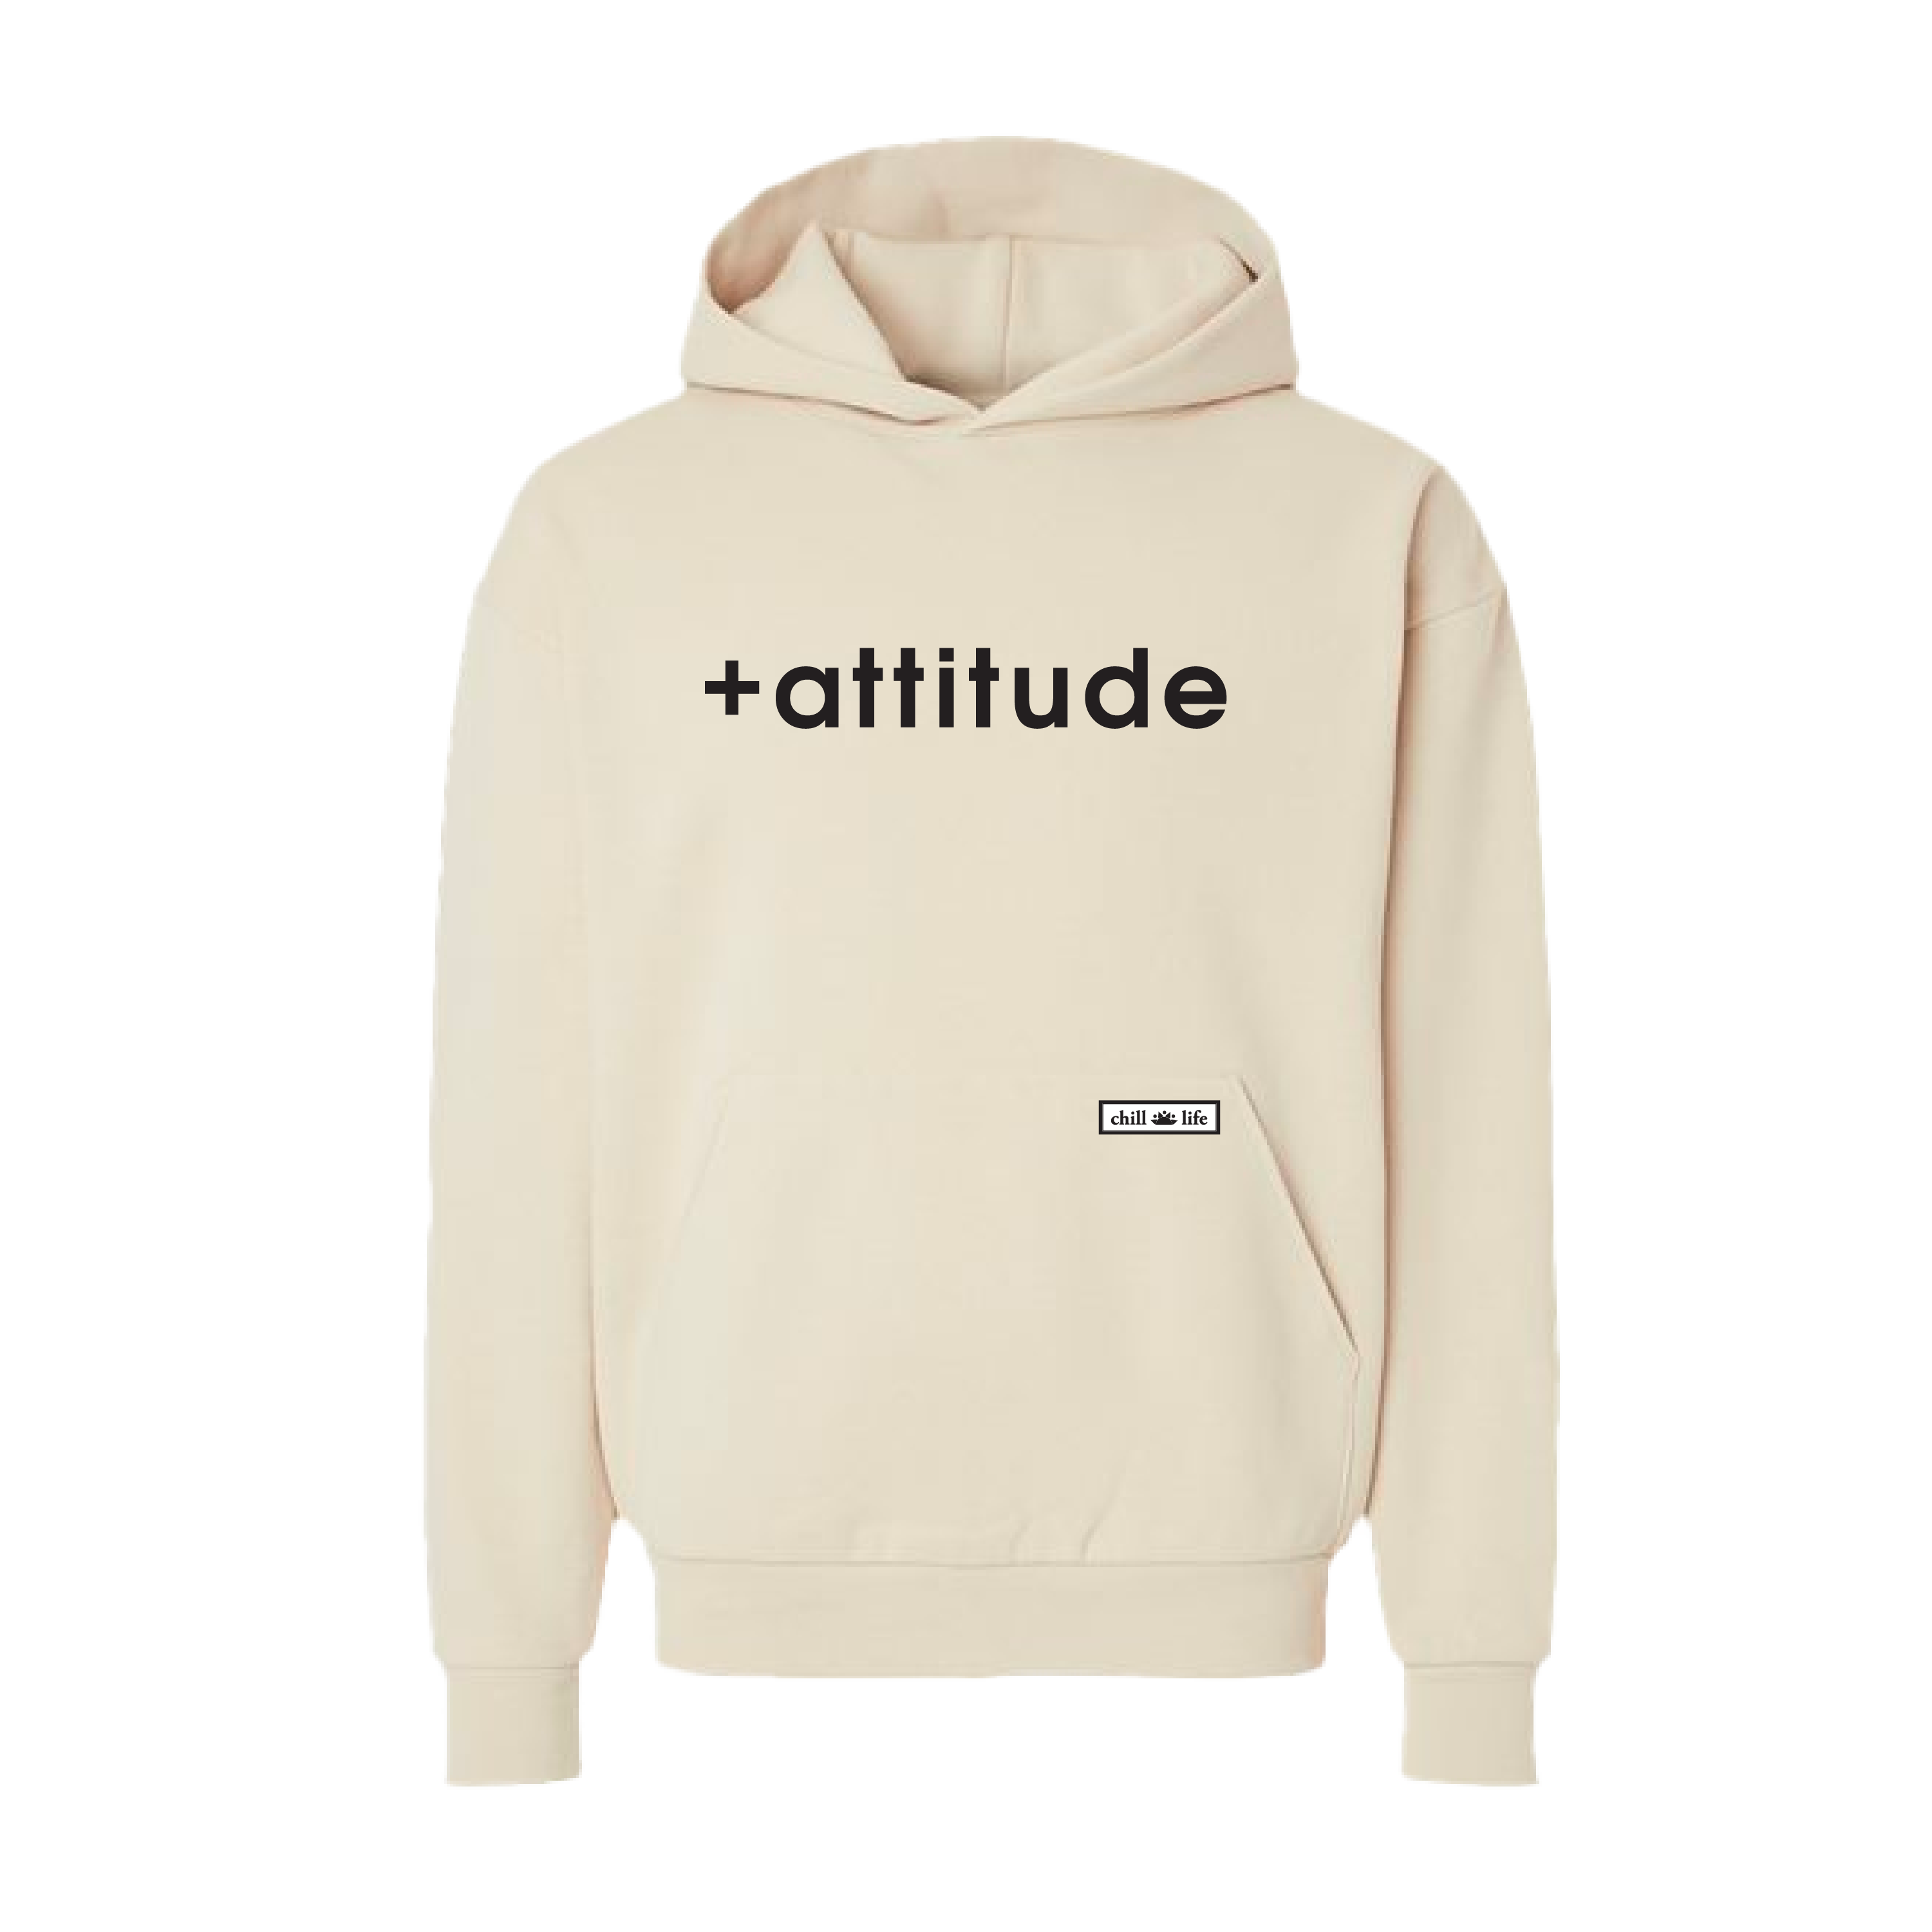 +attitude Hoodie - Ivory chill life style